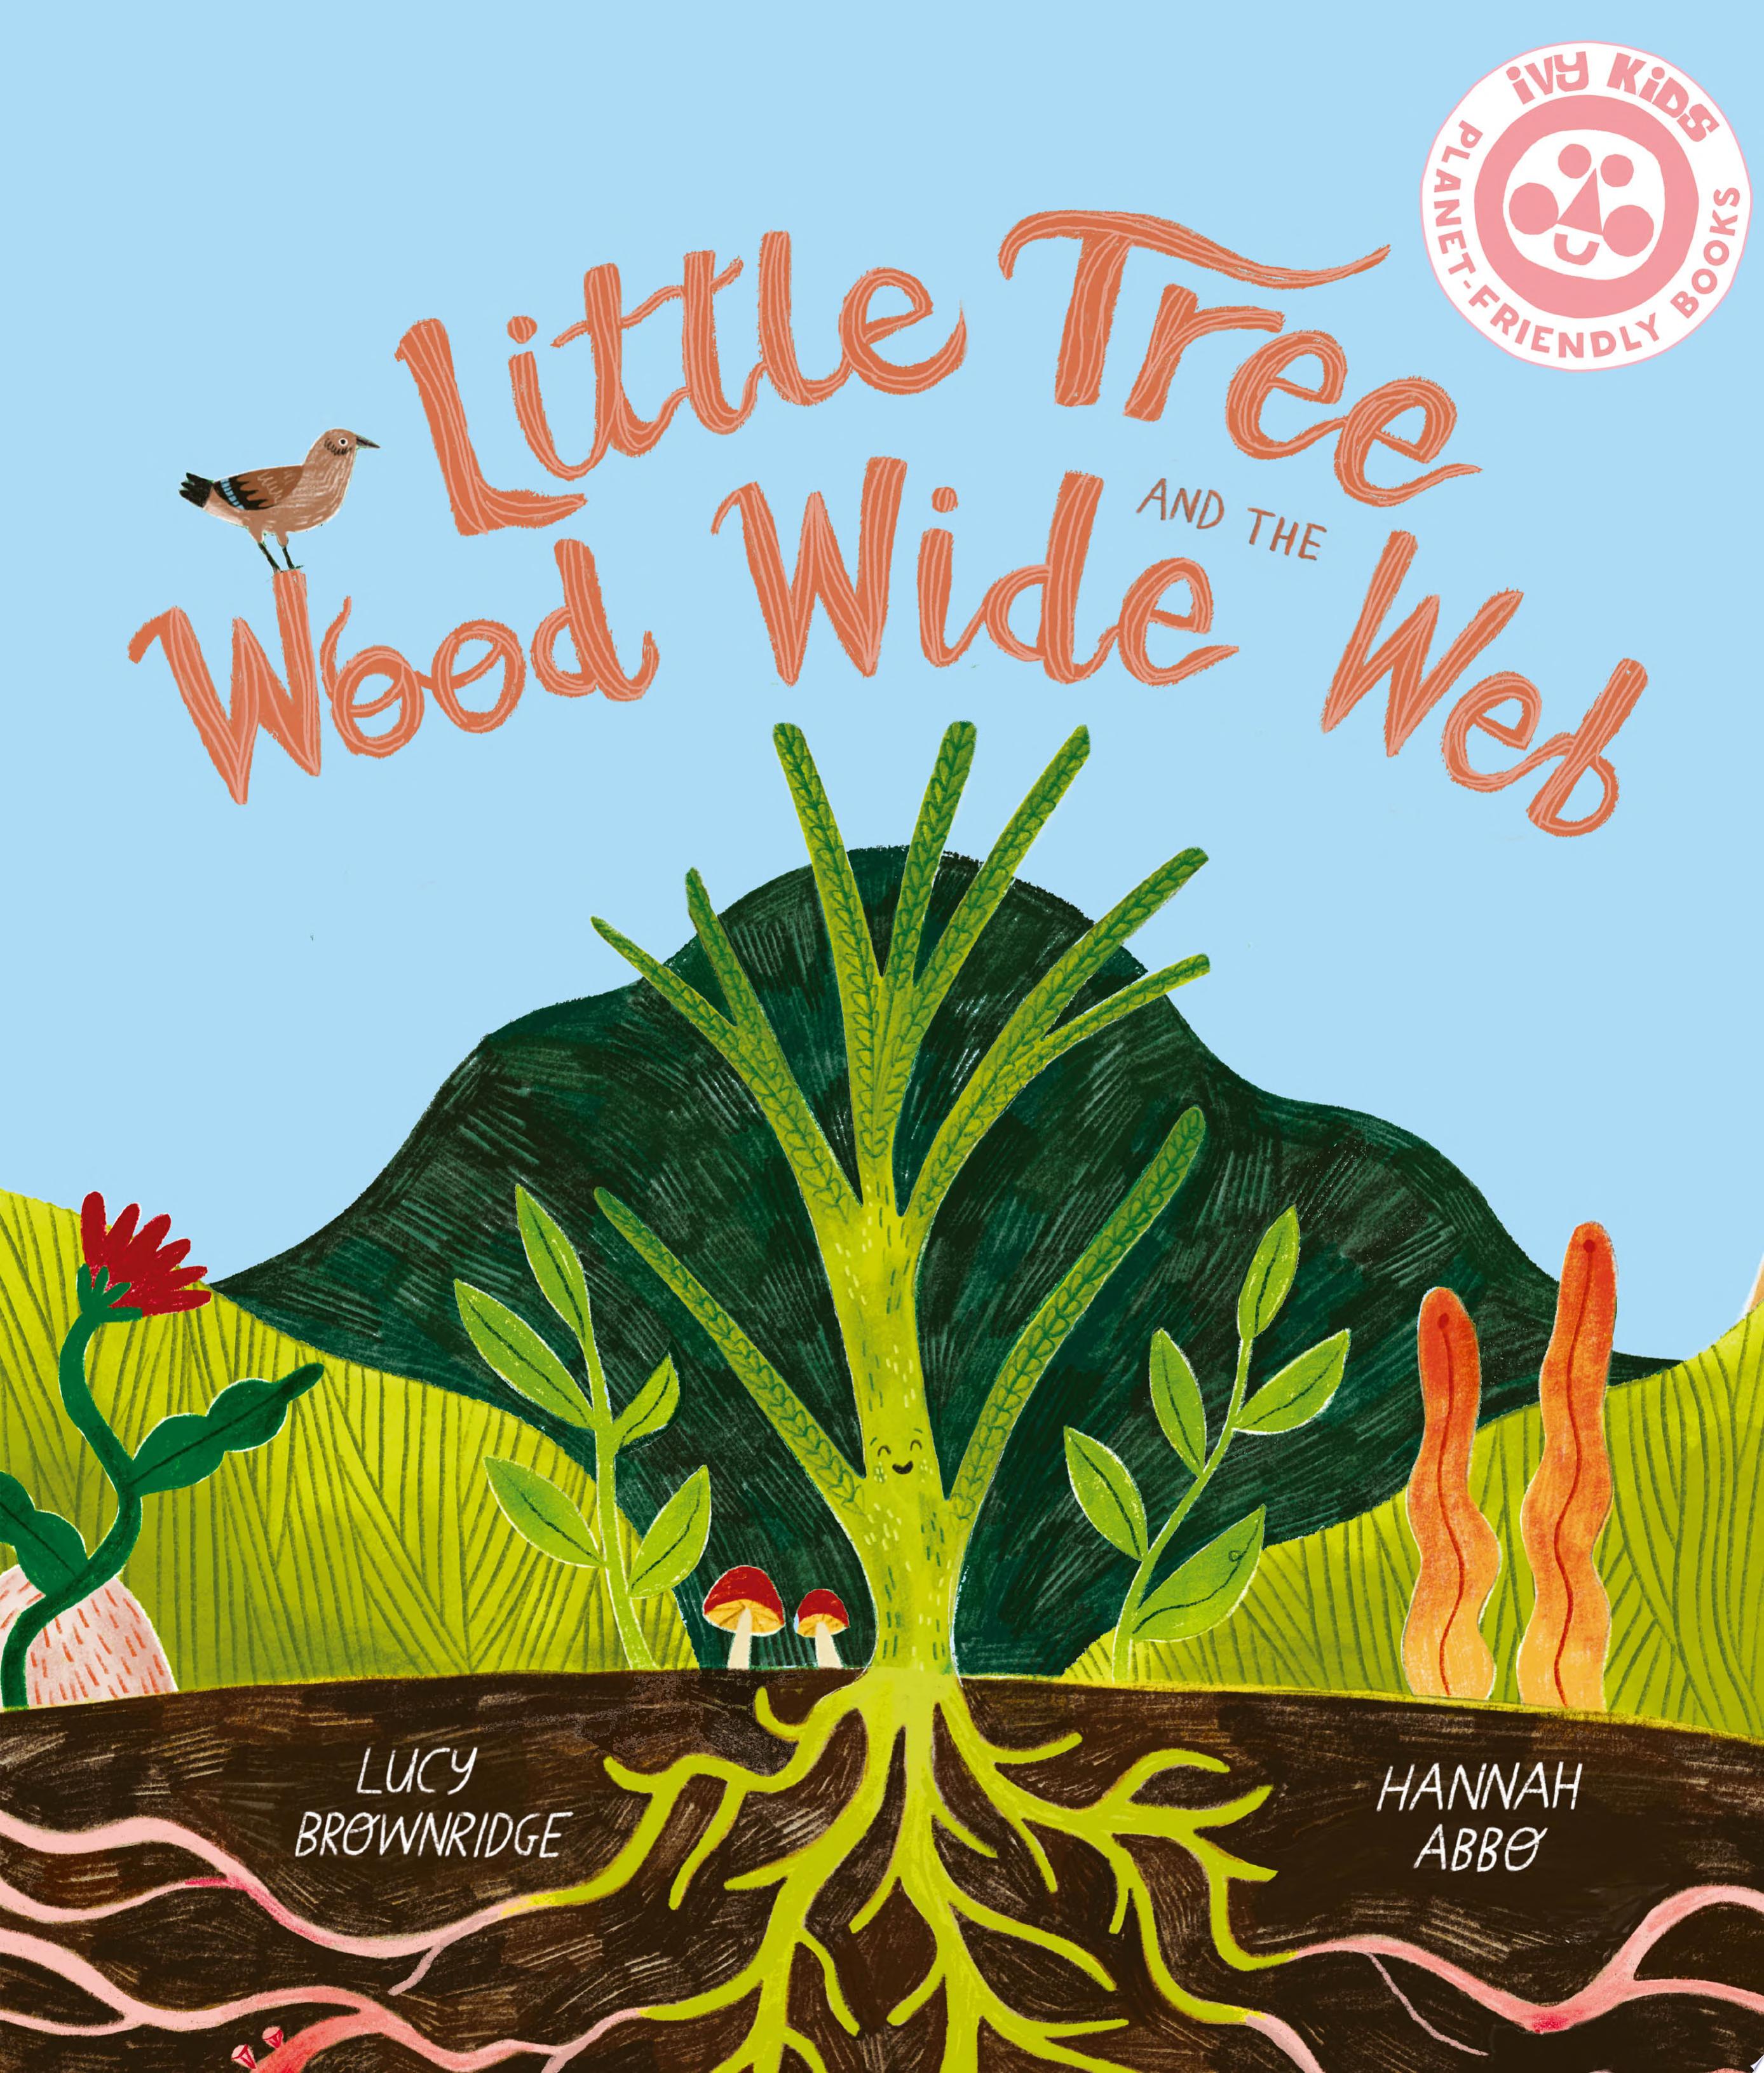 Image for "Little Tree and the Wood Wide Web"